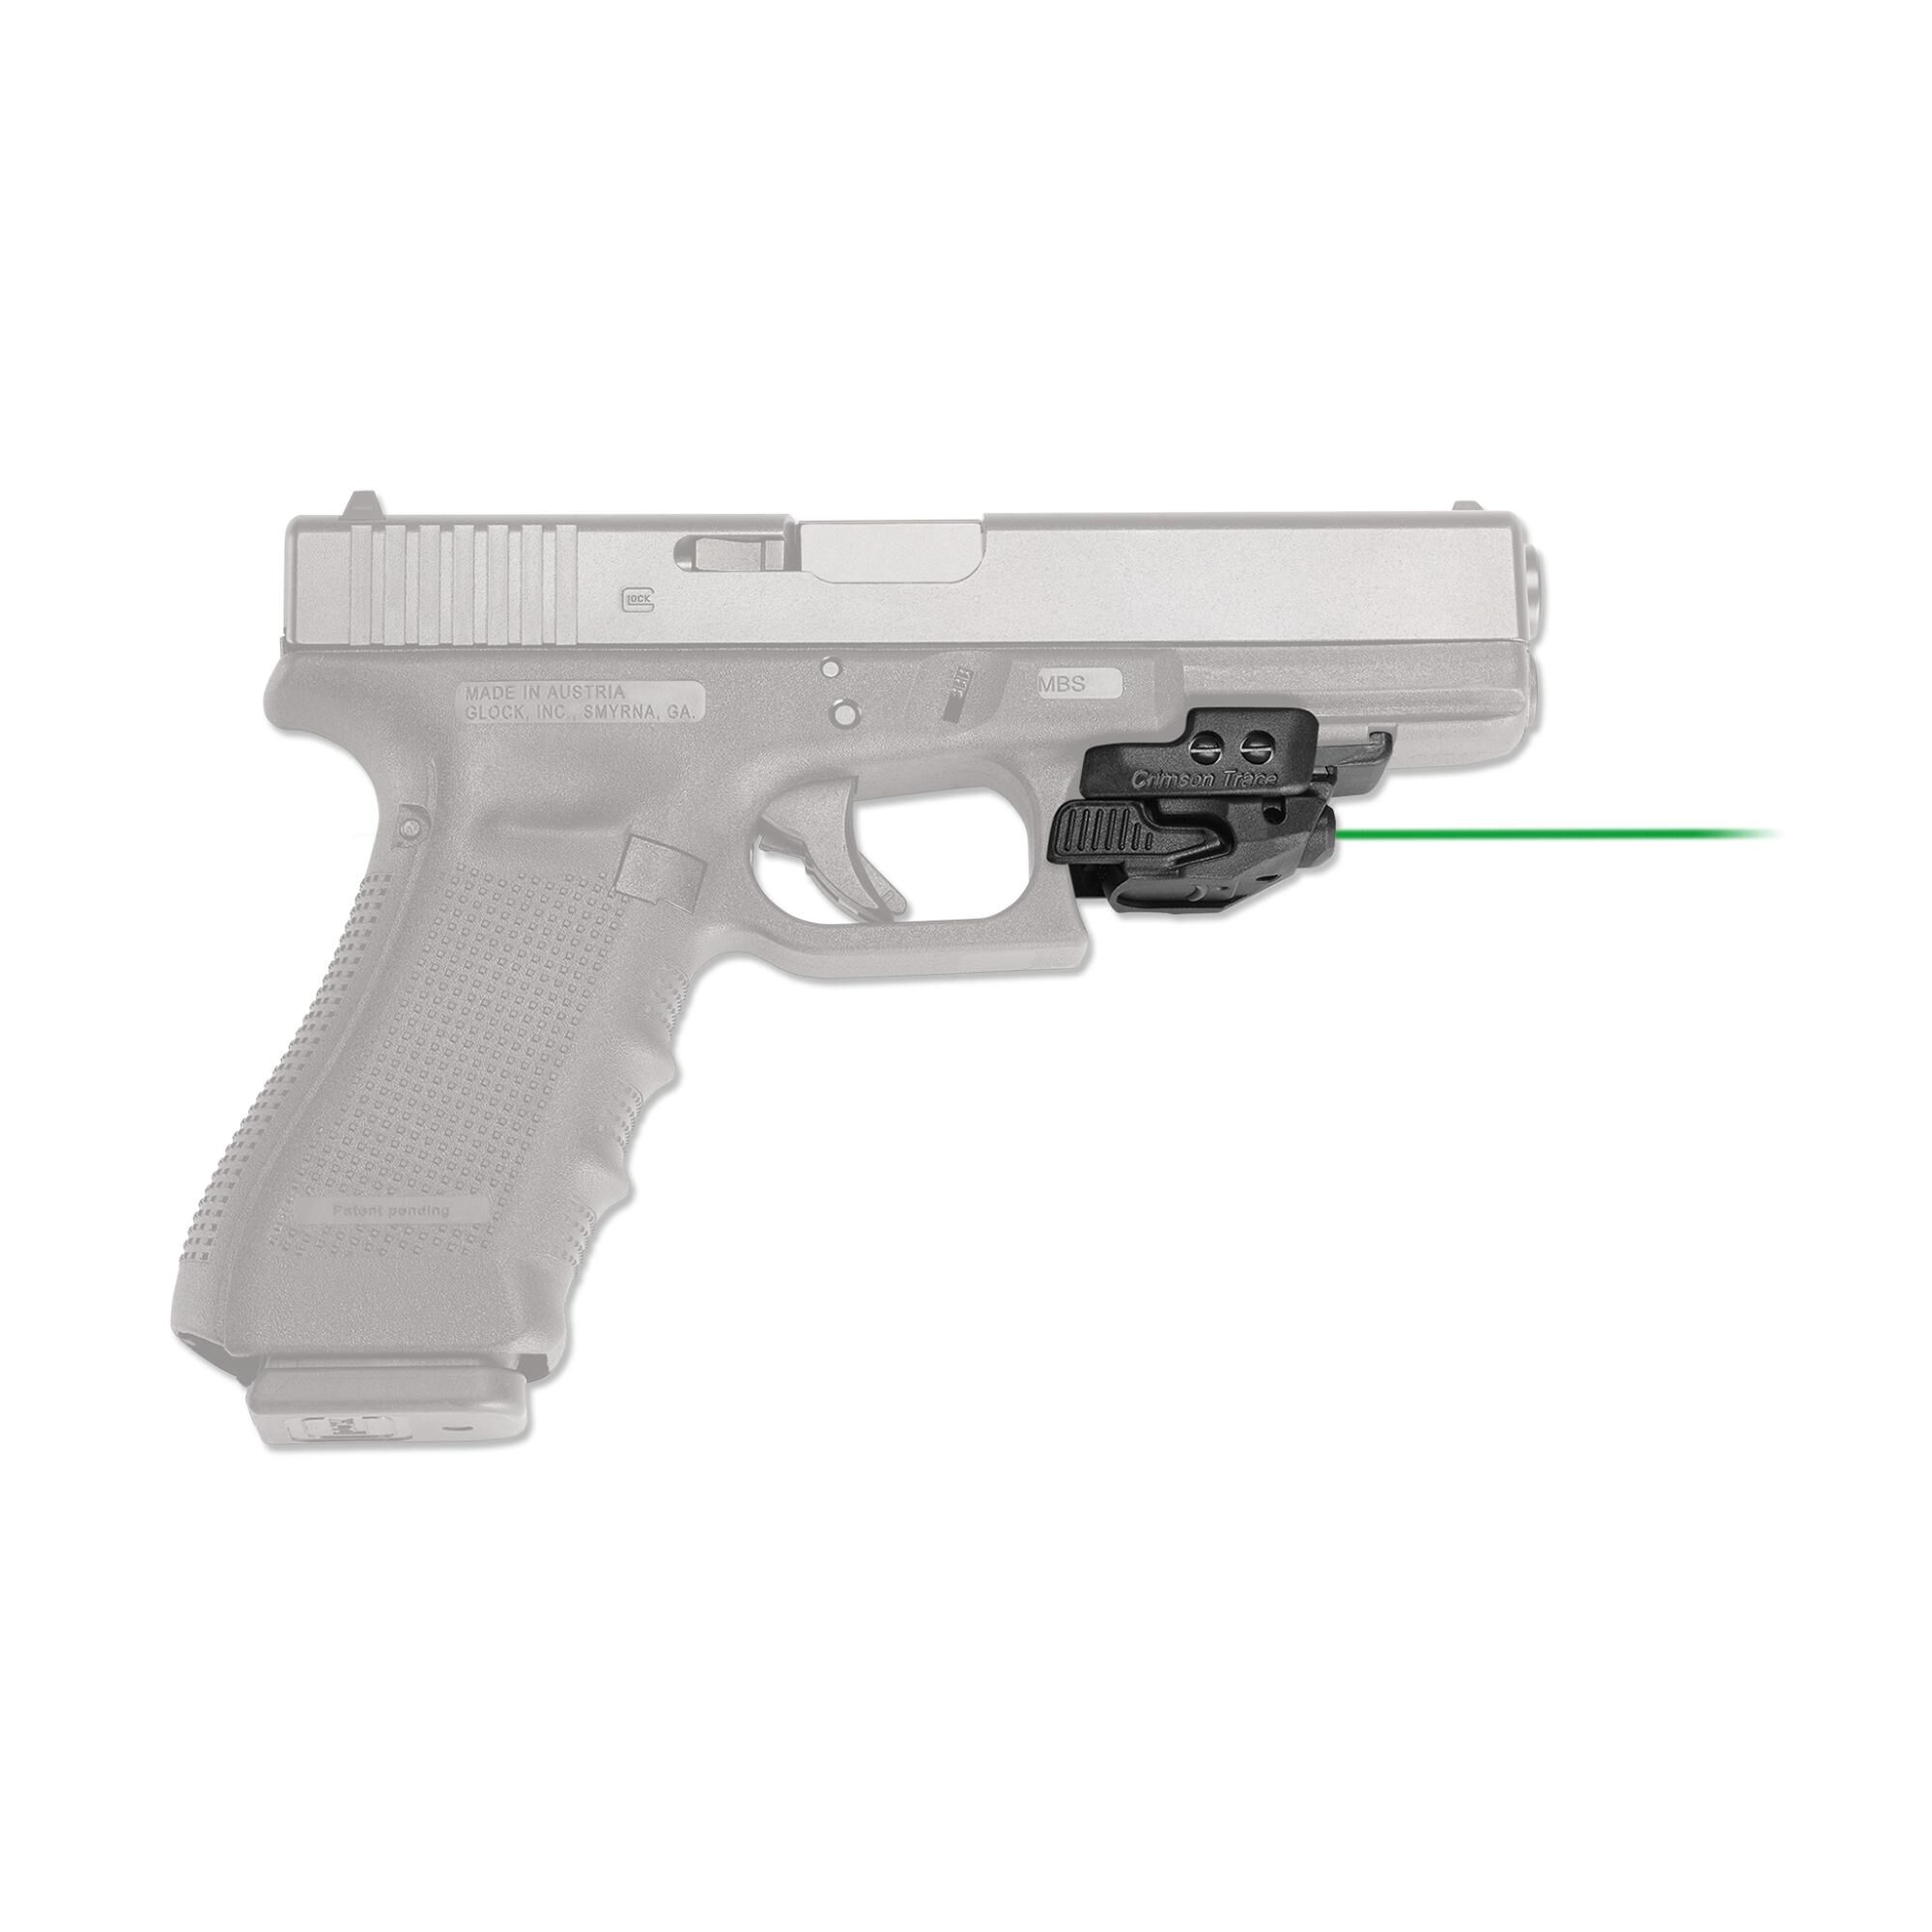 Rechargeable Laser Sight Green Red Dual Beam fit Subcompact to Full Size Handgun 